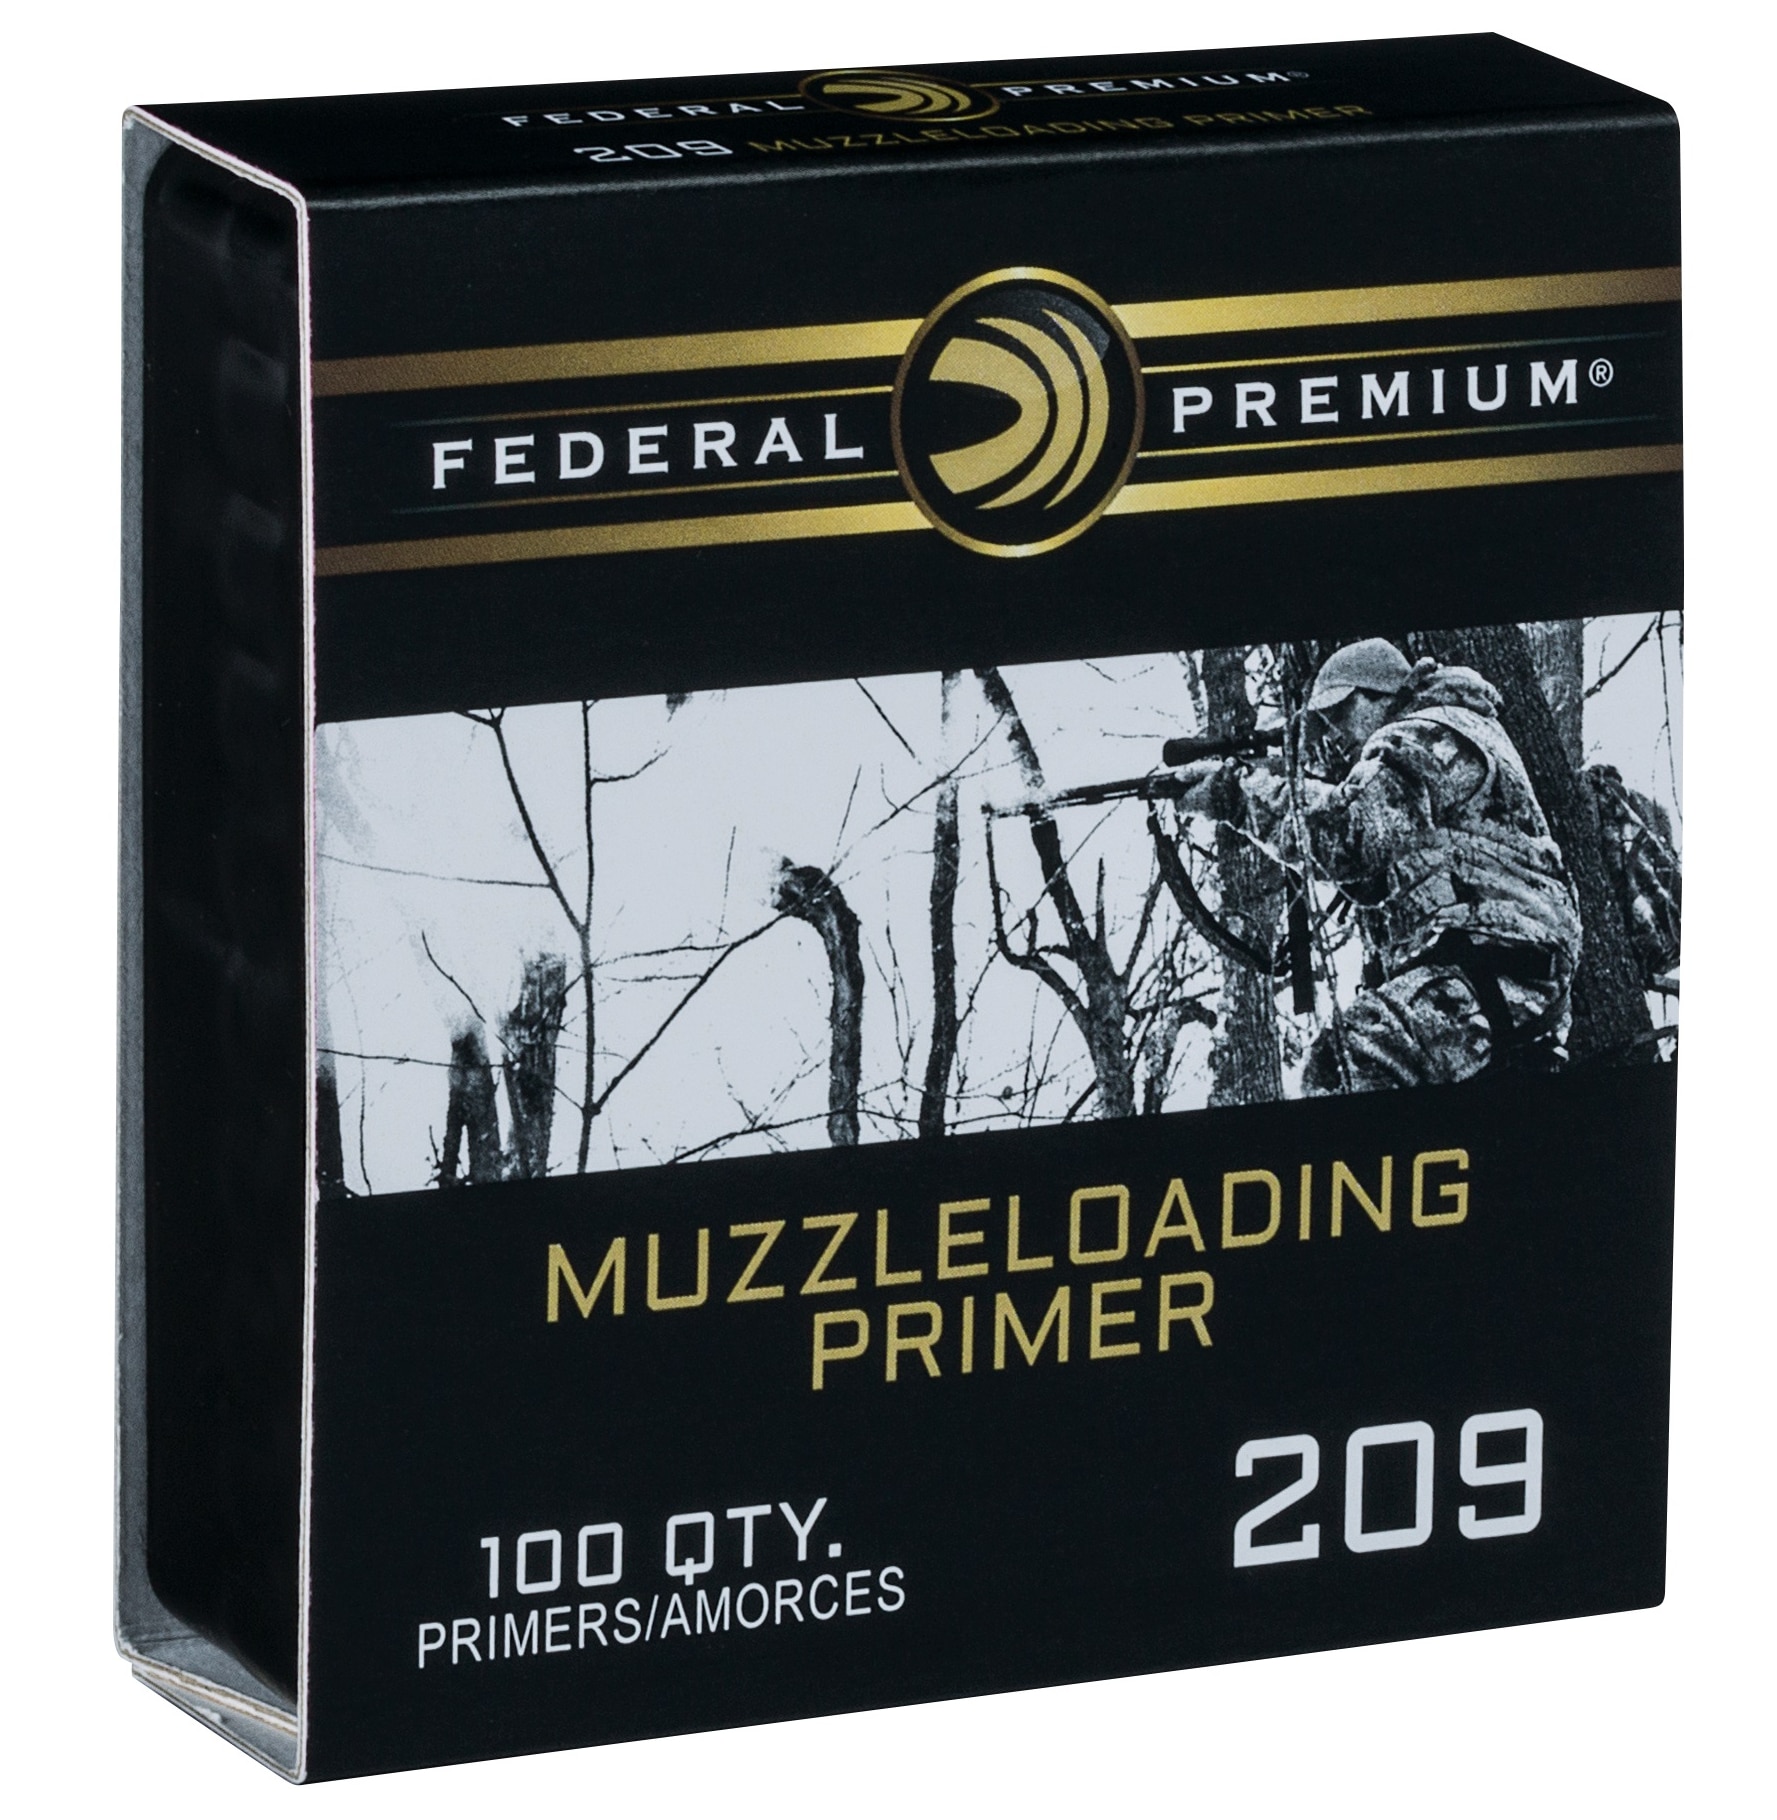 The new 209 Muzzleloading Primer is one of the newer products released by Federal Premium Ammunition in 2017. (Photo: Federal Premium)